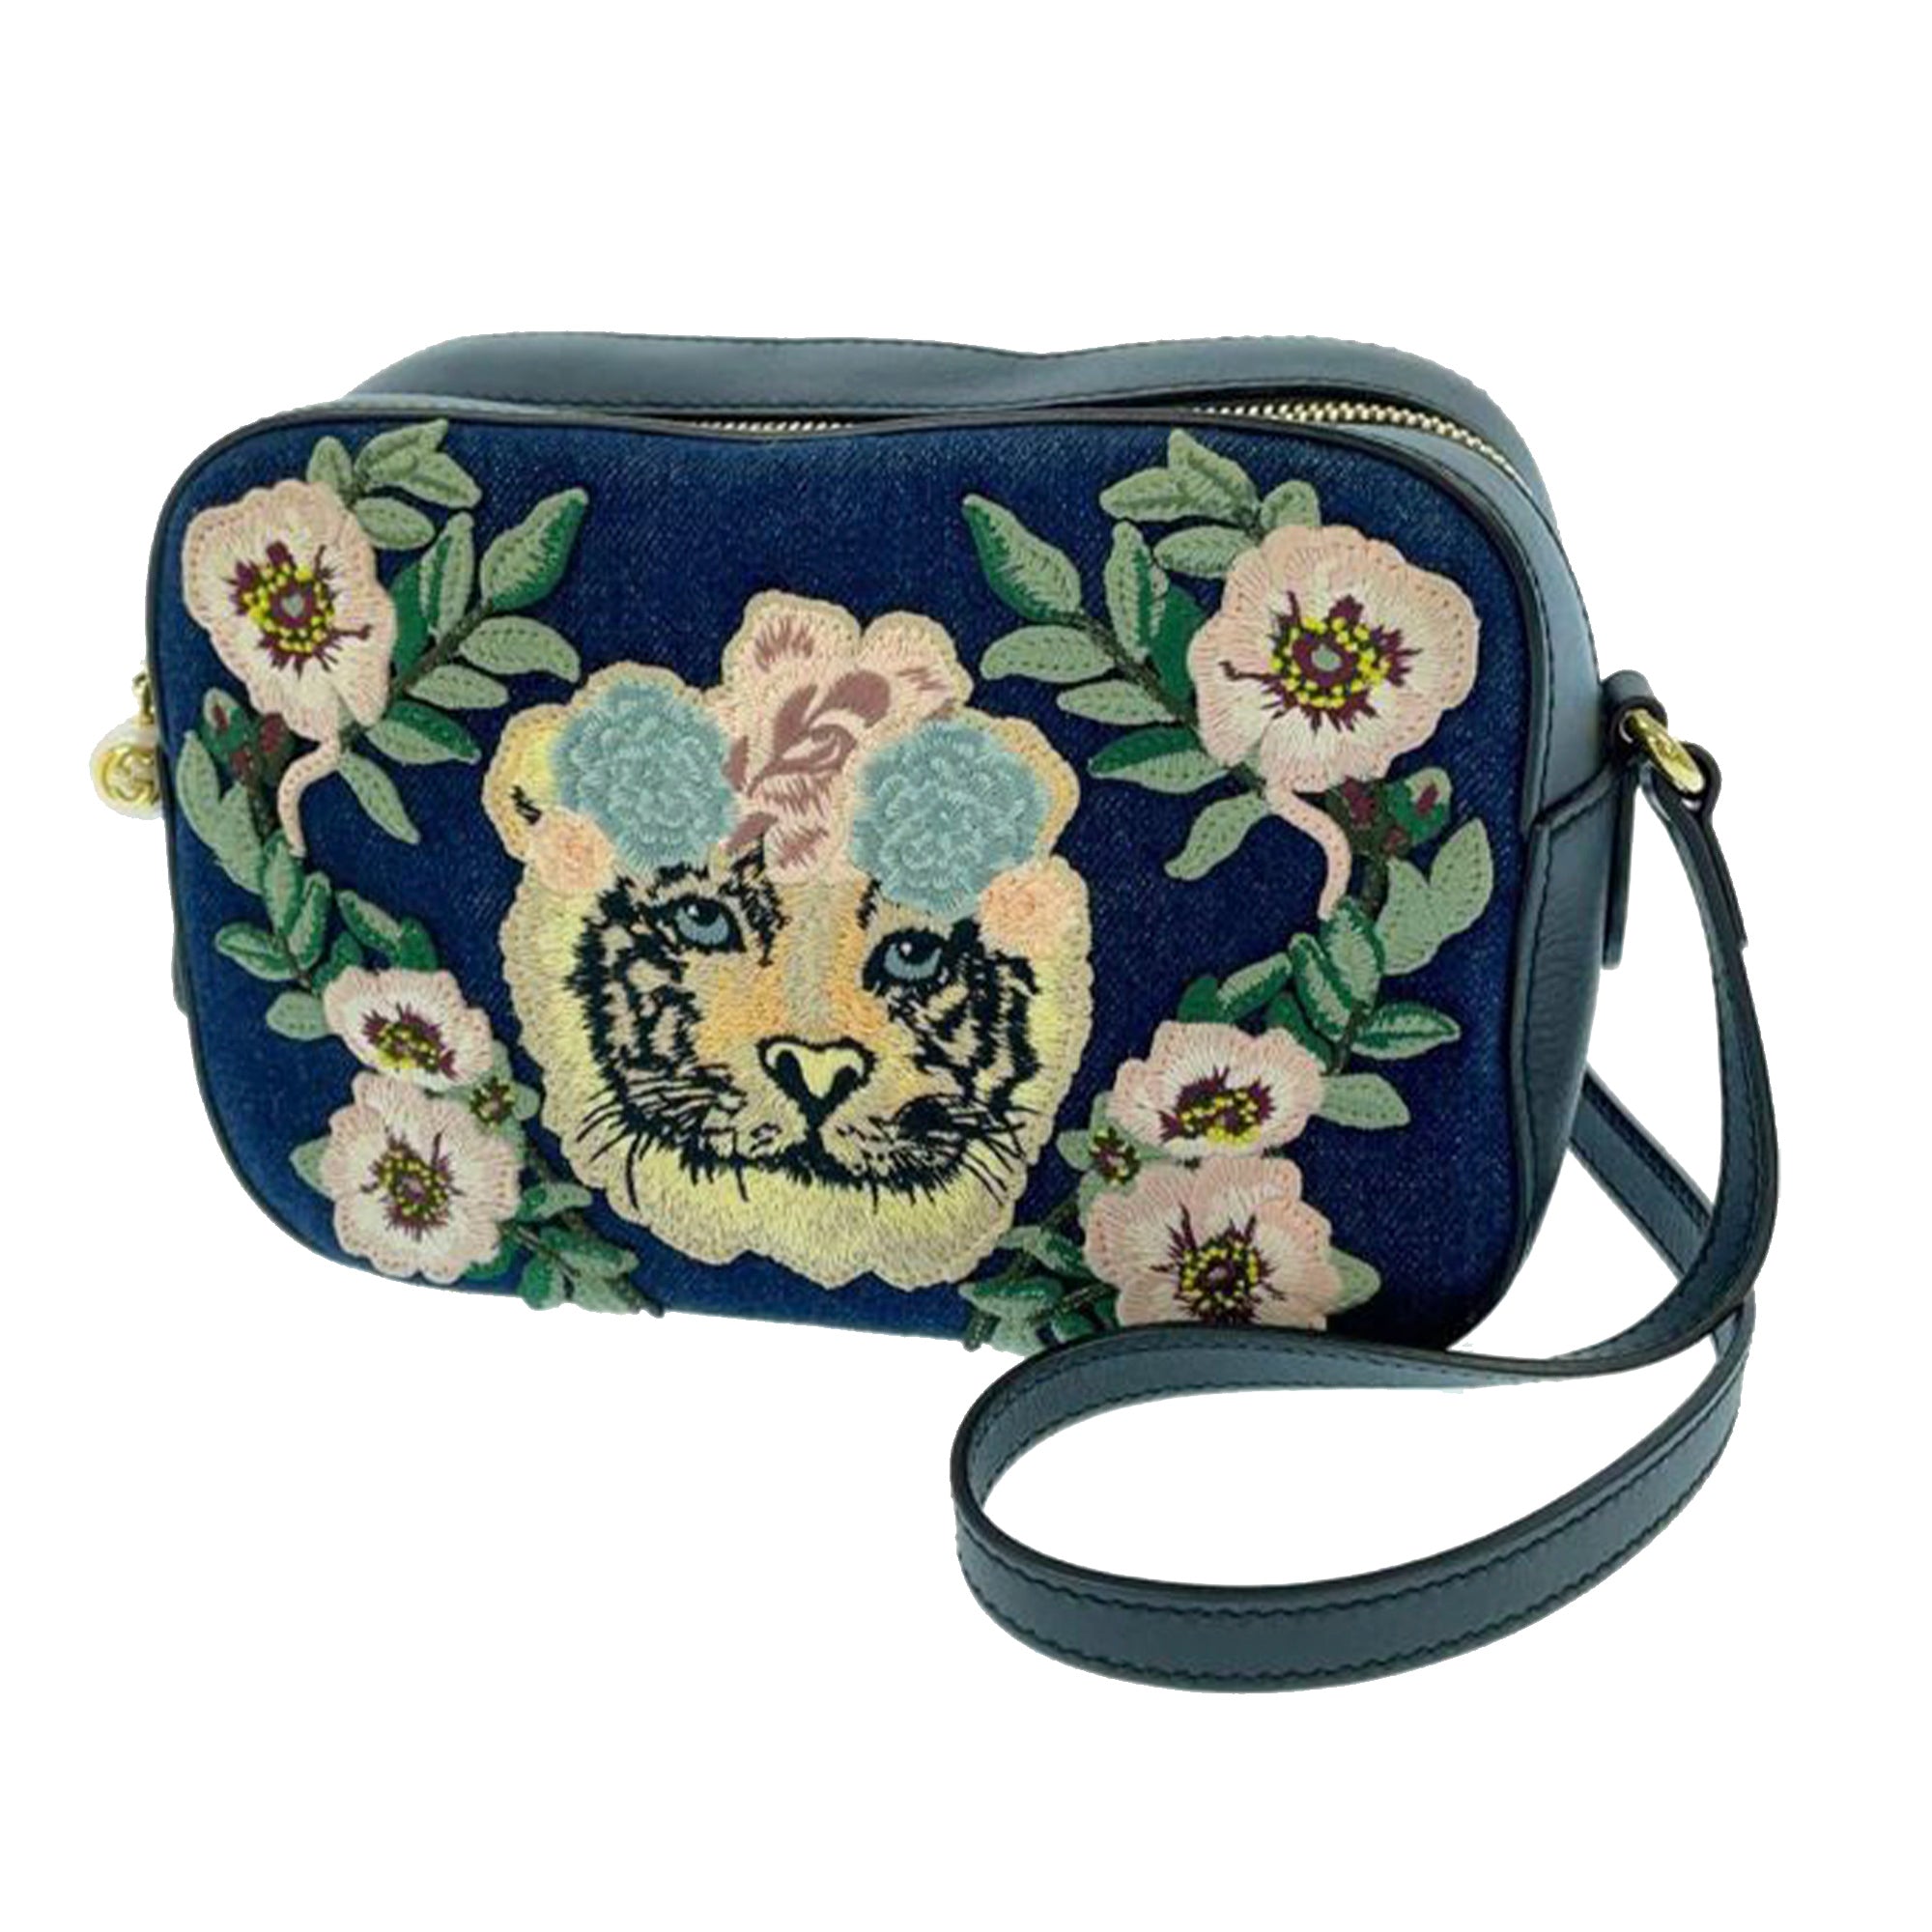 Gucci, Bags, Gucci Flower Pouch